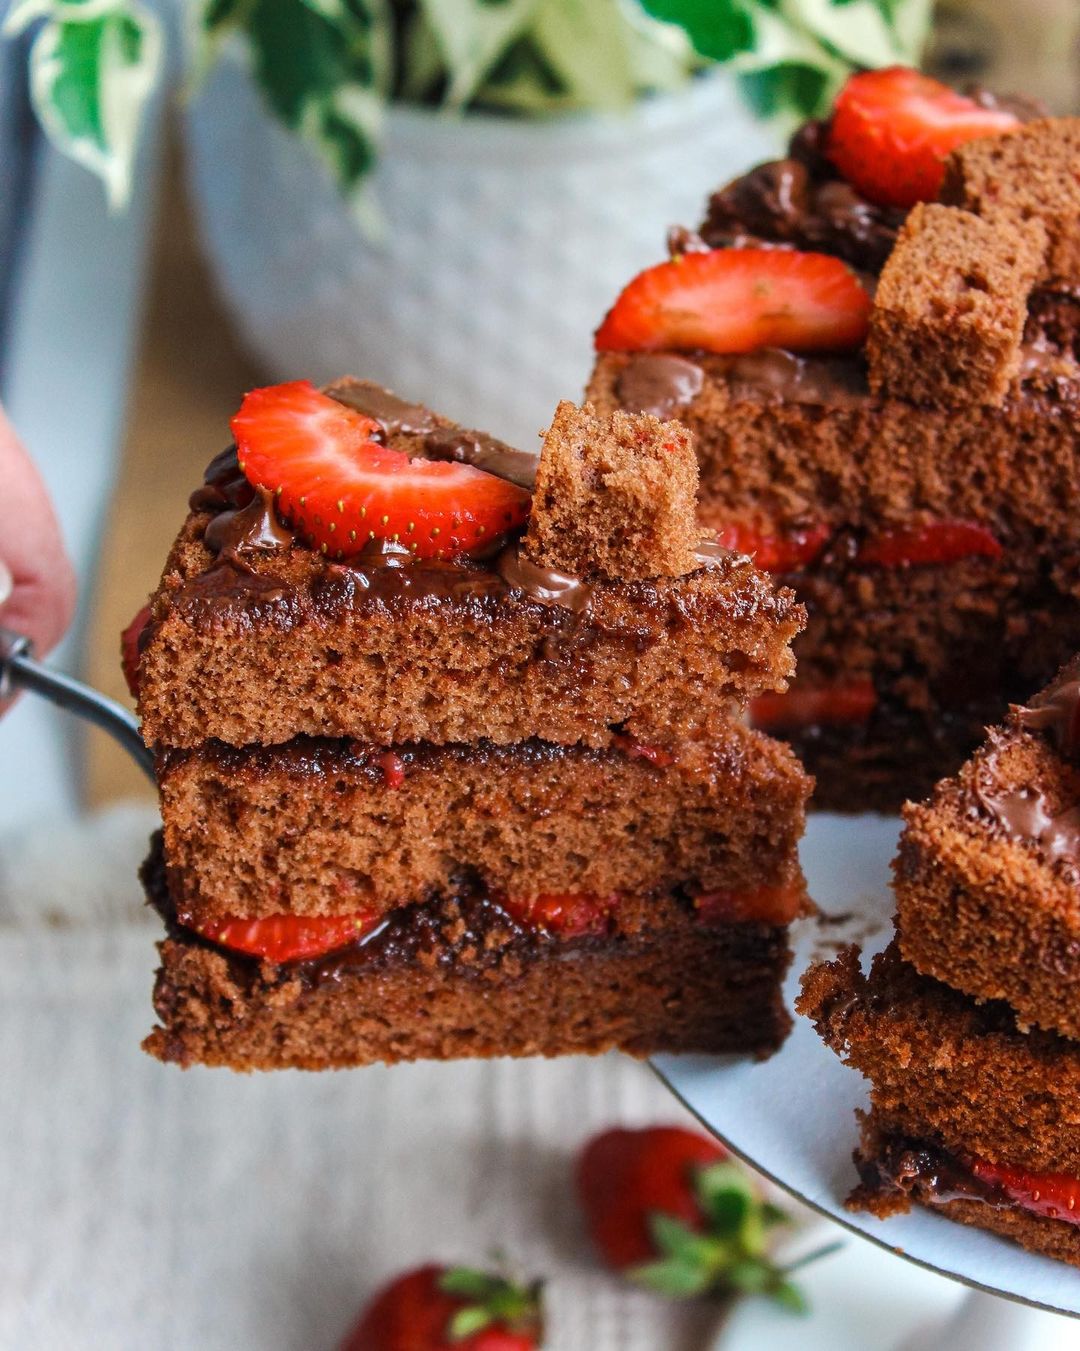 Nutella cake with strawberry